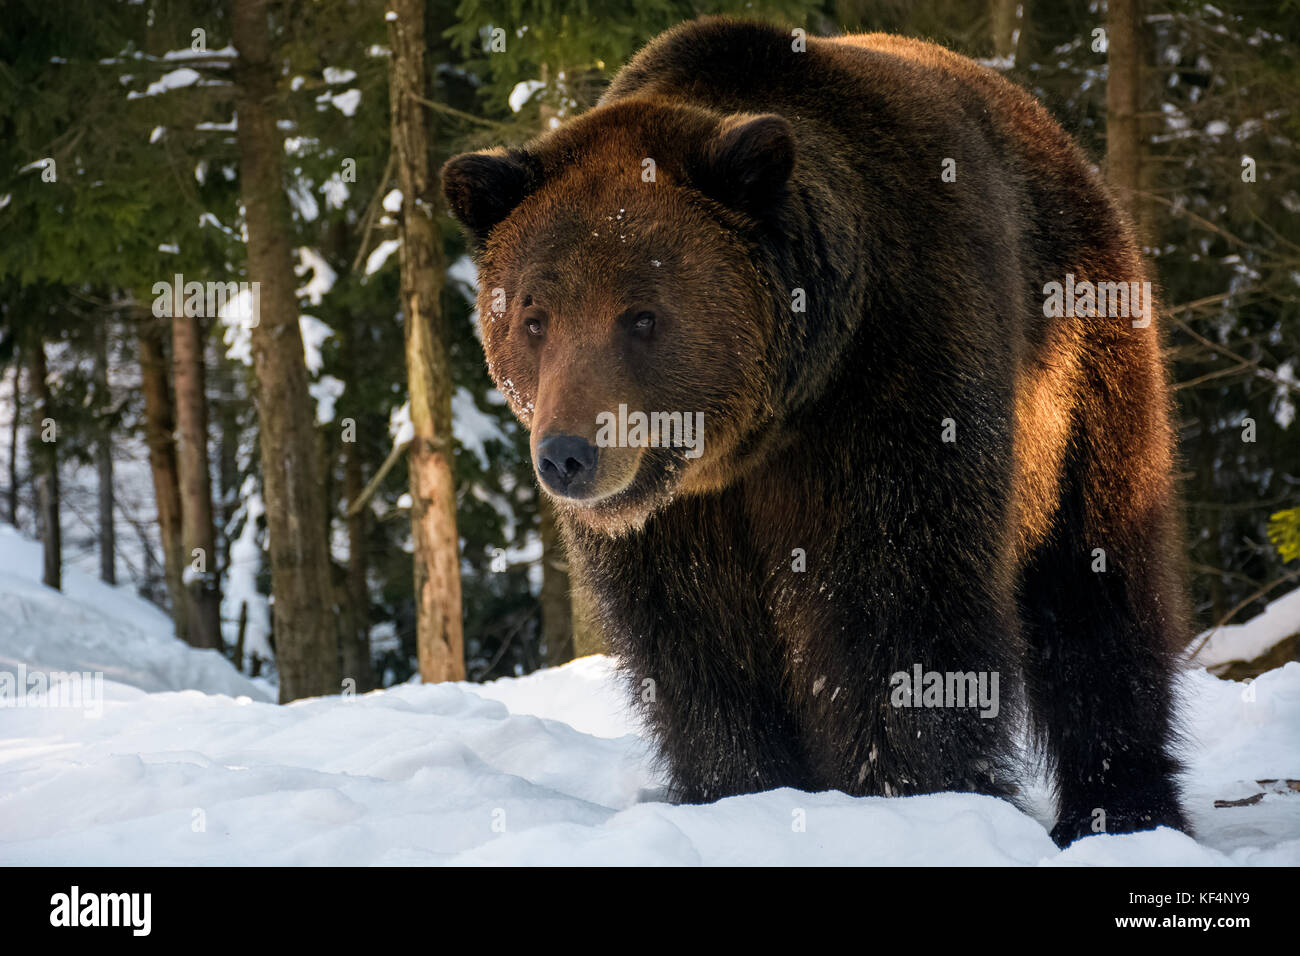 old brown bear stand and stare in the winter forest. lovely wildlife scenery in evening light Stock Photo